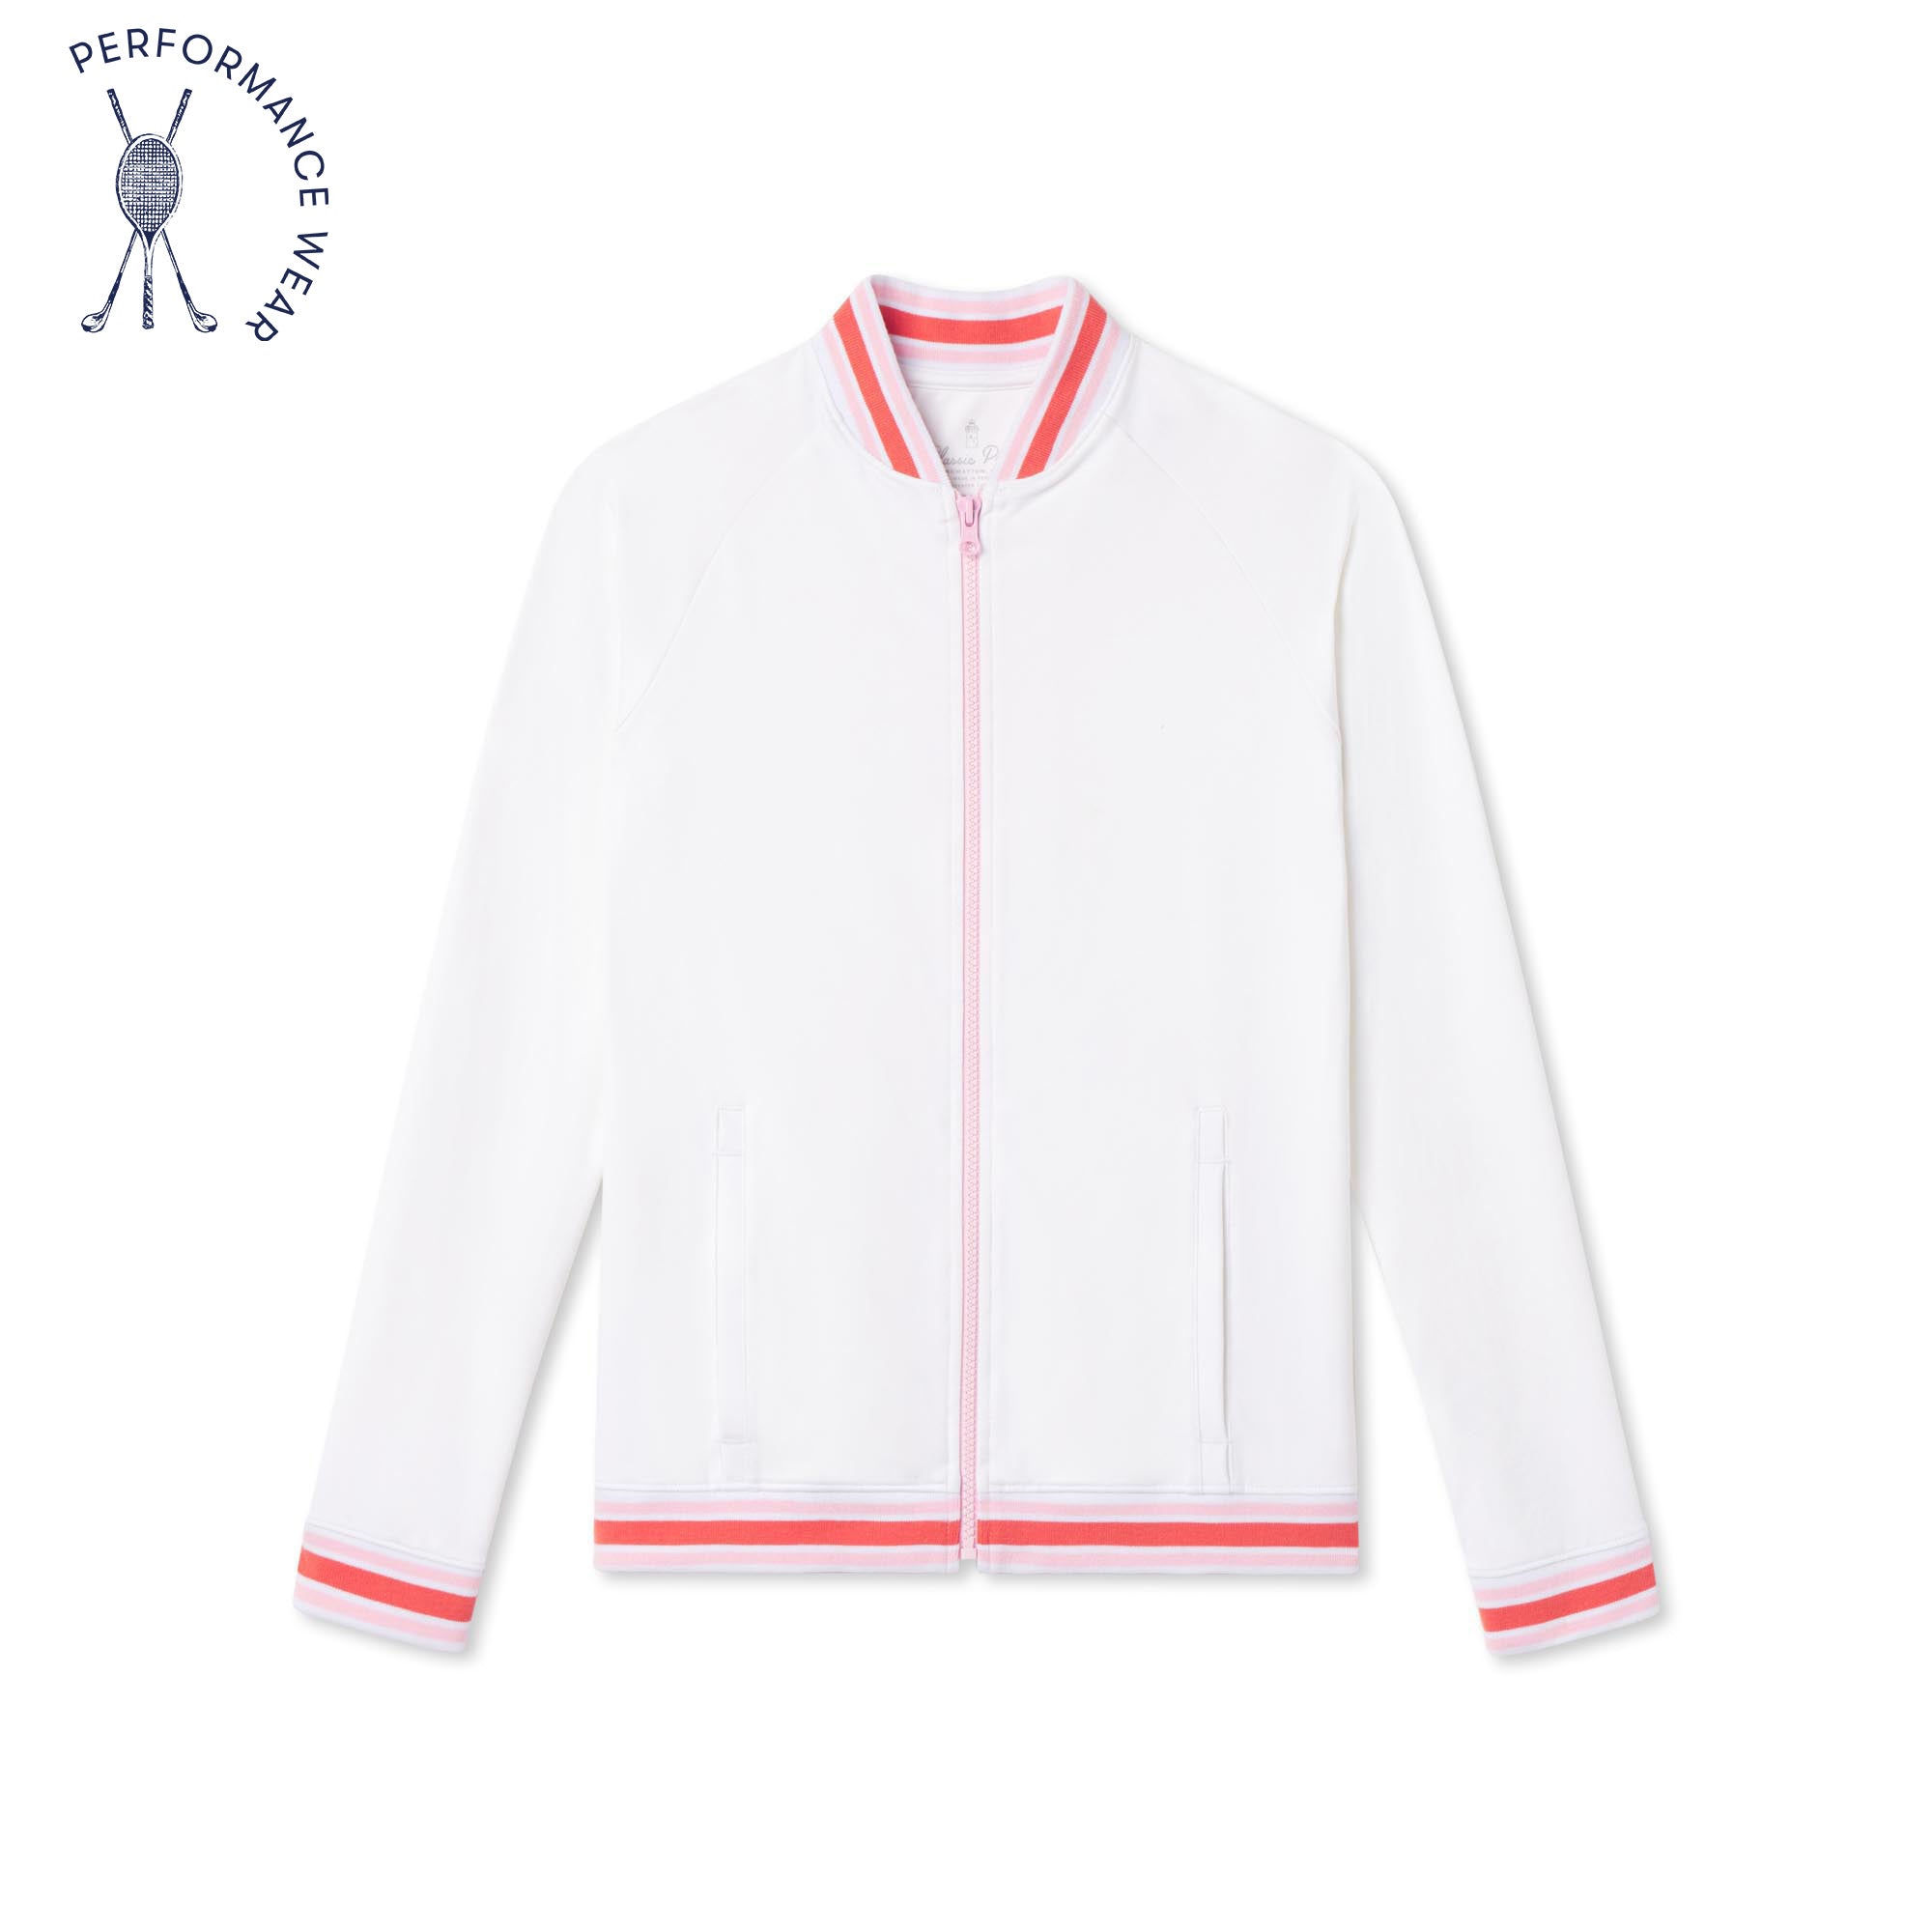 Classic and Preppy Reid Bomber Performance Sherbet Jacket, Bright White-Outerwear-Bright White-XS (2-3T)-CPC - Classic Prep Childrenswear